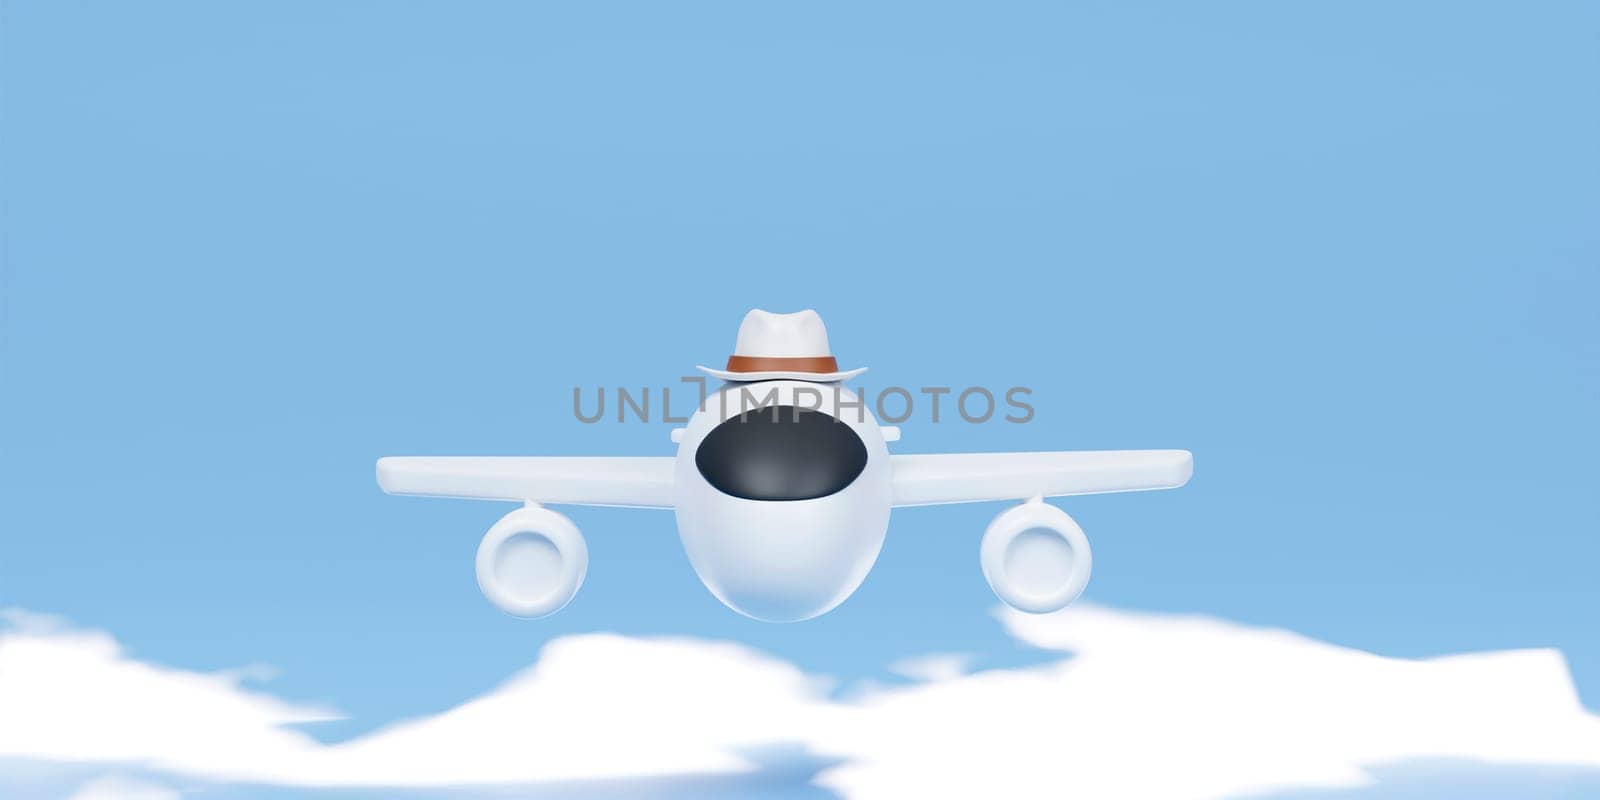 3D Airplane with hat flying traveling concept 3d illustration by meepiangraphic